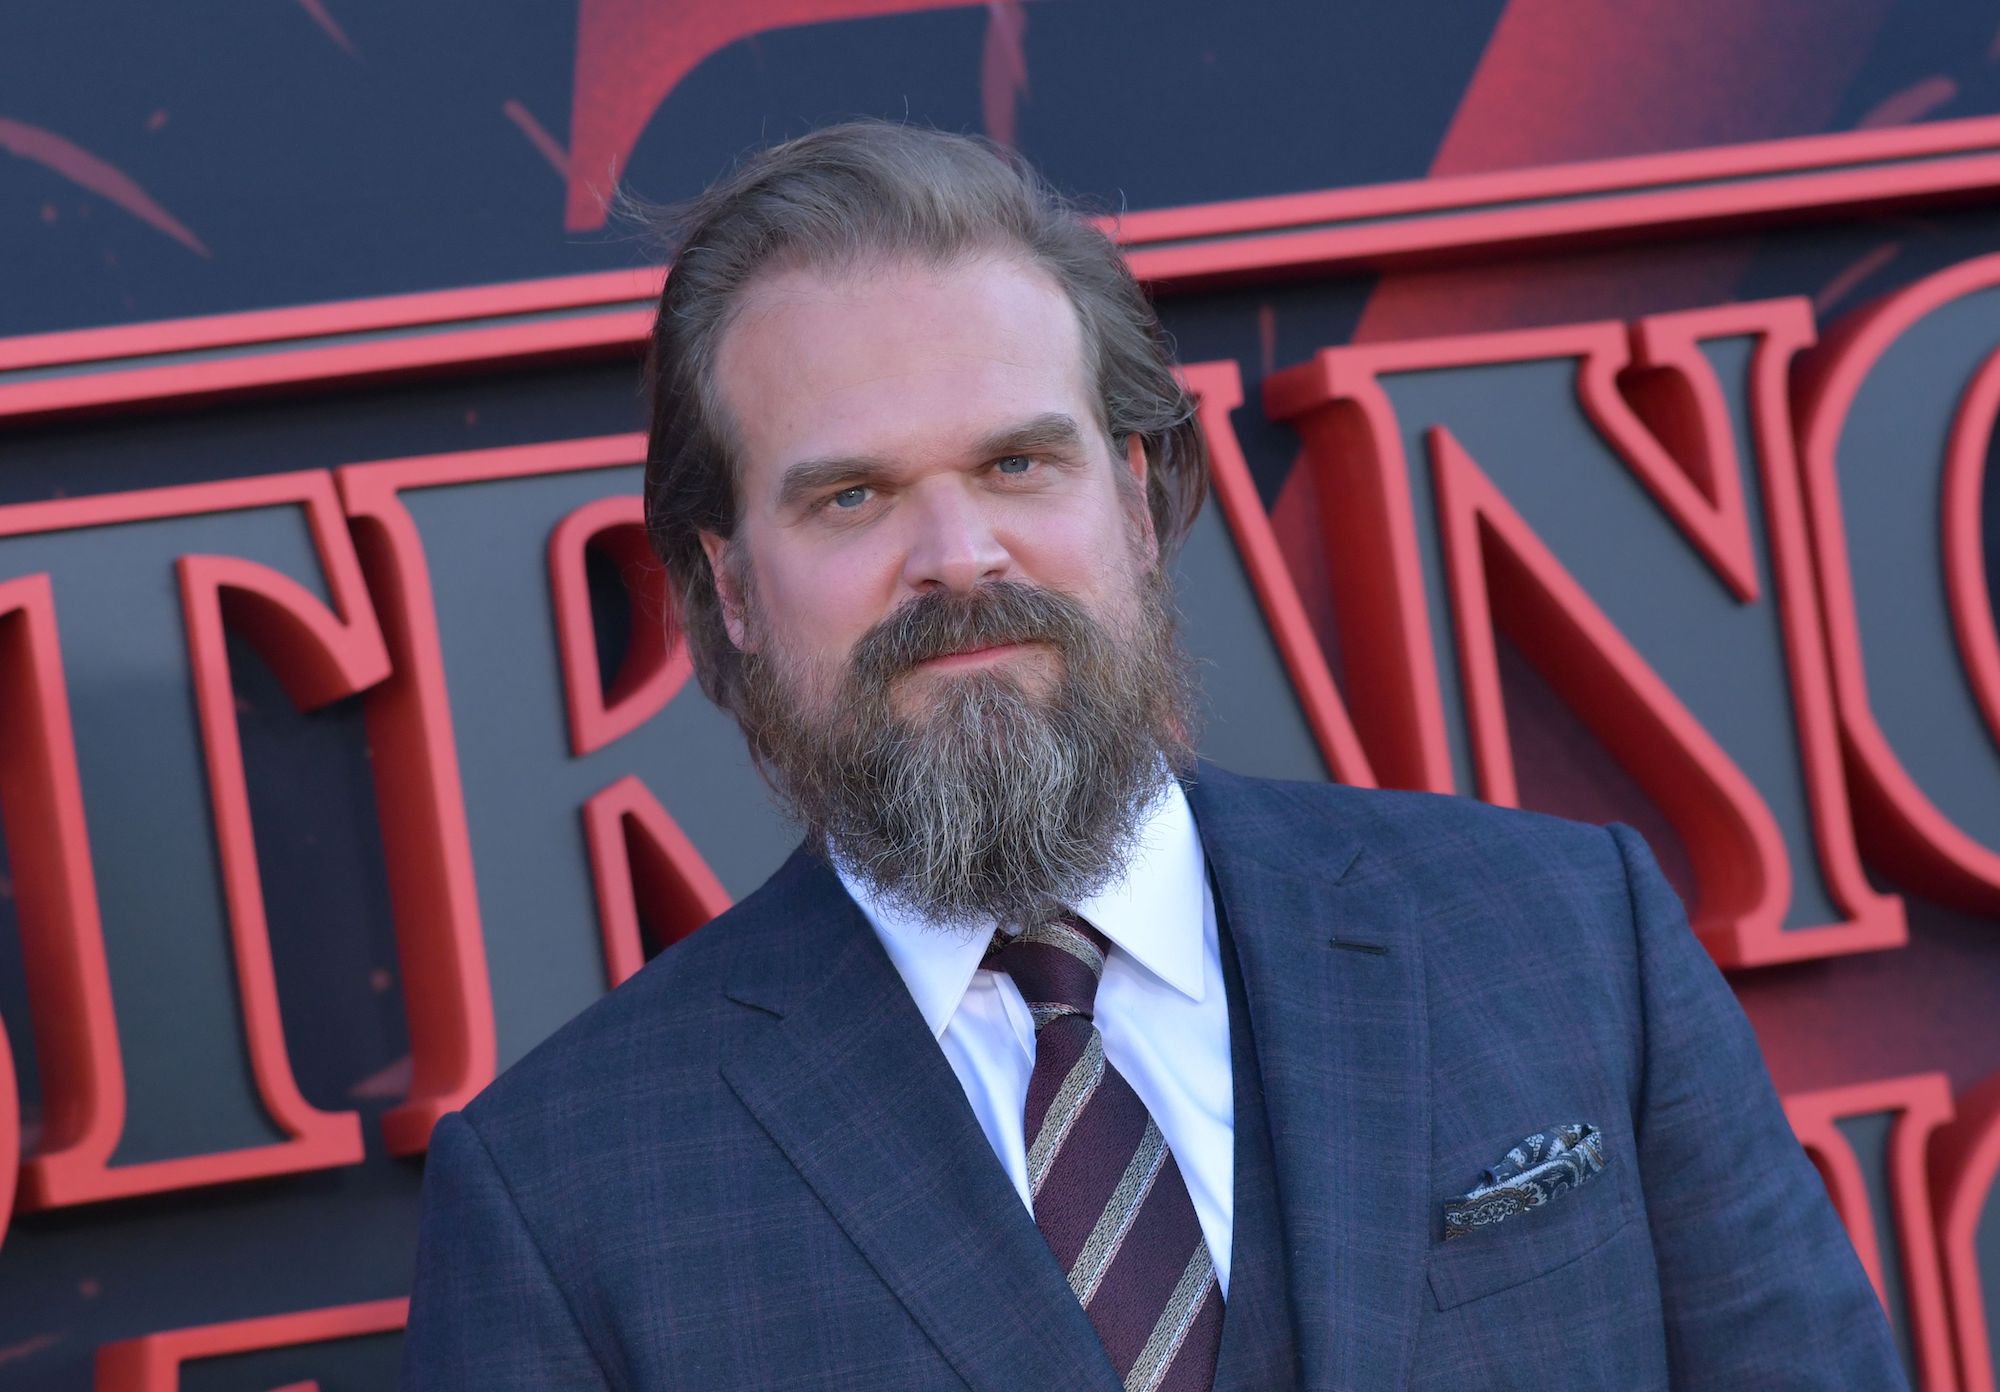 David Harbour smiling slightly at the camera